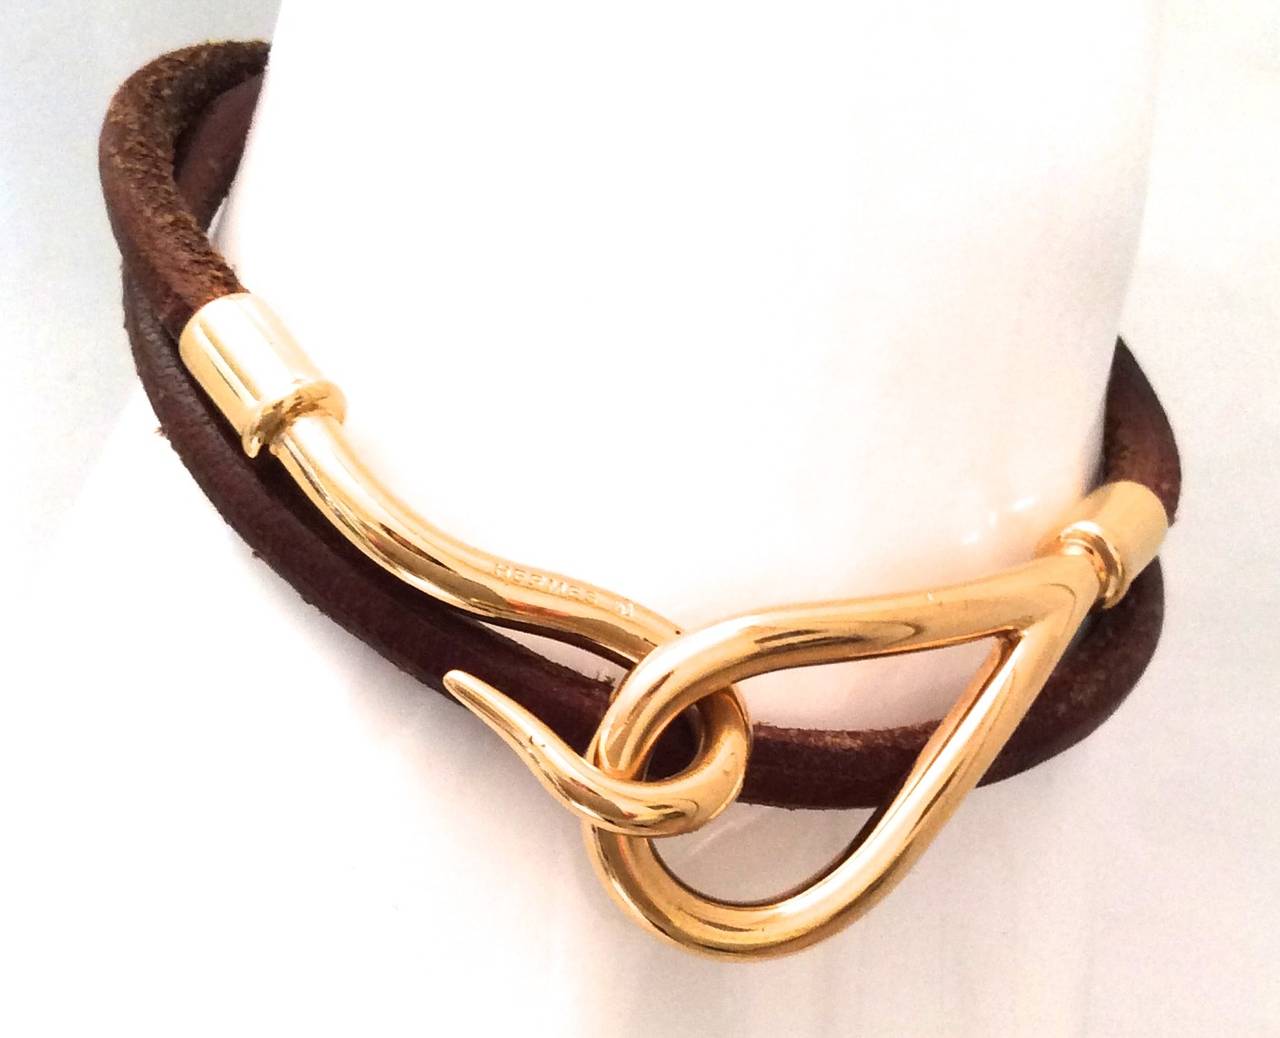 This gold tone and brown leather Hermes Necklace can be used as a bracelet or necklace. It consist of brown leather connected to an oval shape gold-tone holder which connects to the hook. When wrapped around twice it can be used as bracelet.